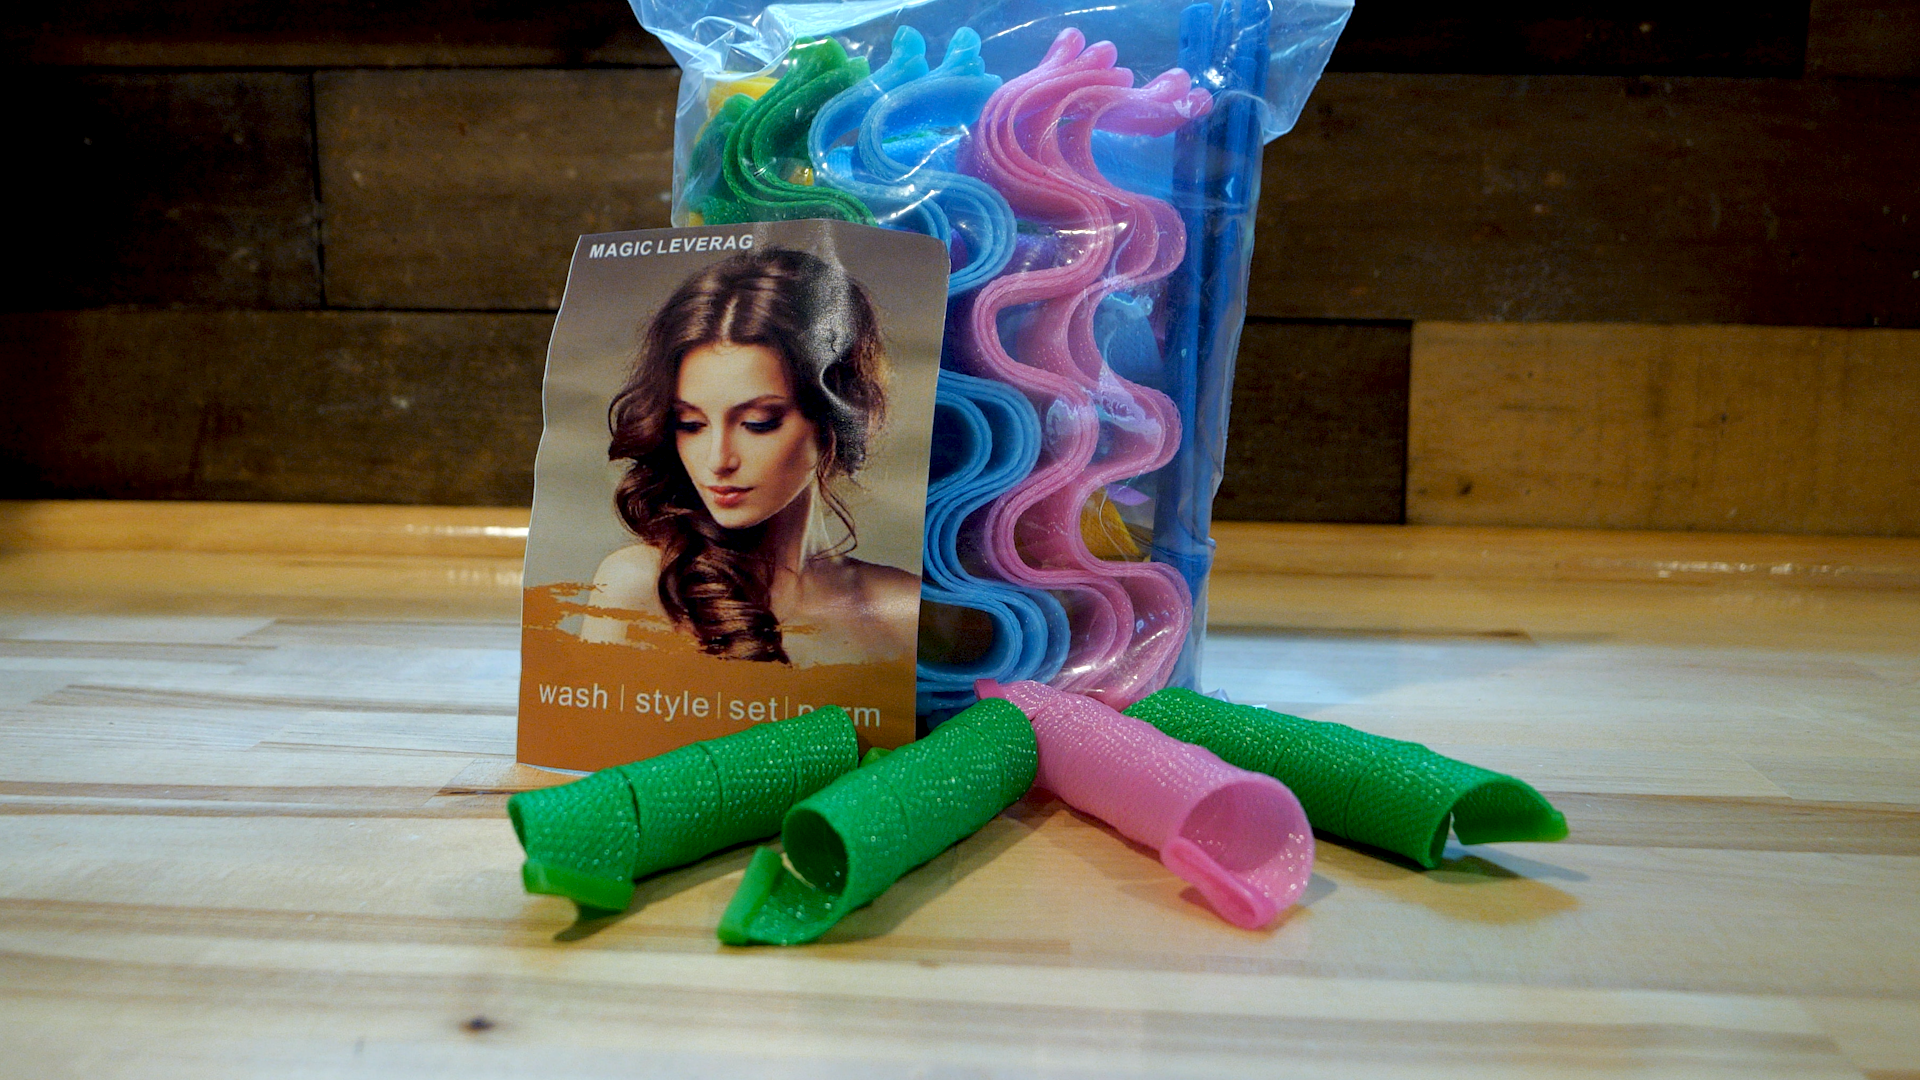 We Try out the "Spiral Curls" to find out if they are better than a traditional curling iron.